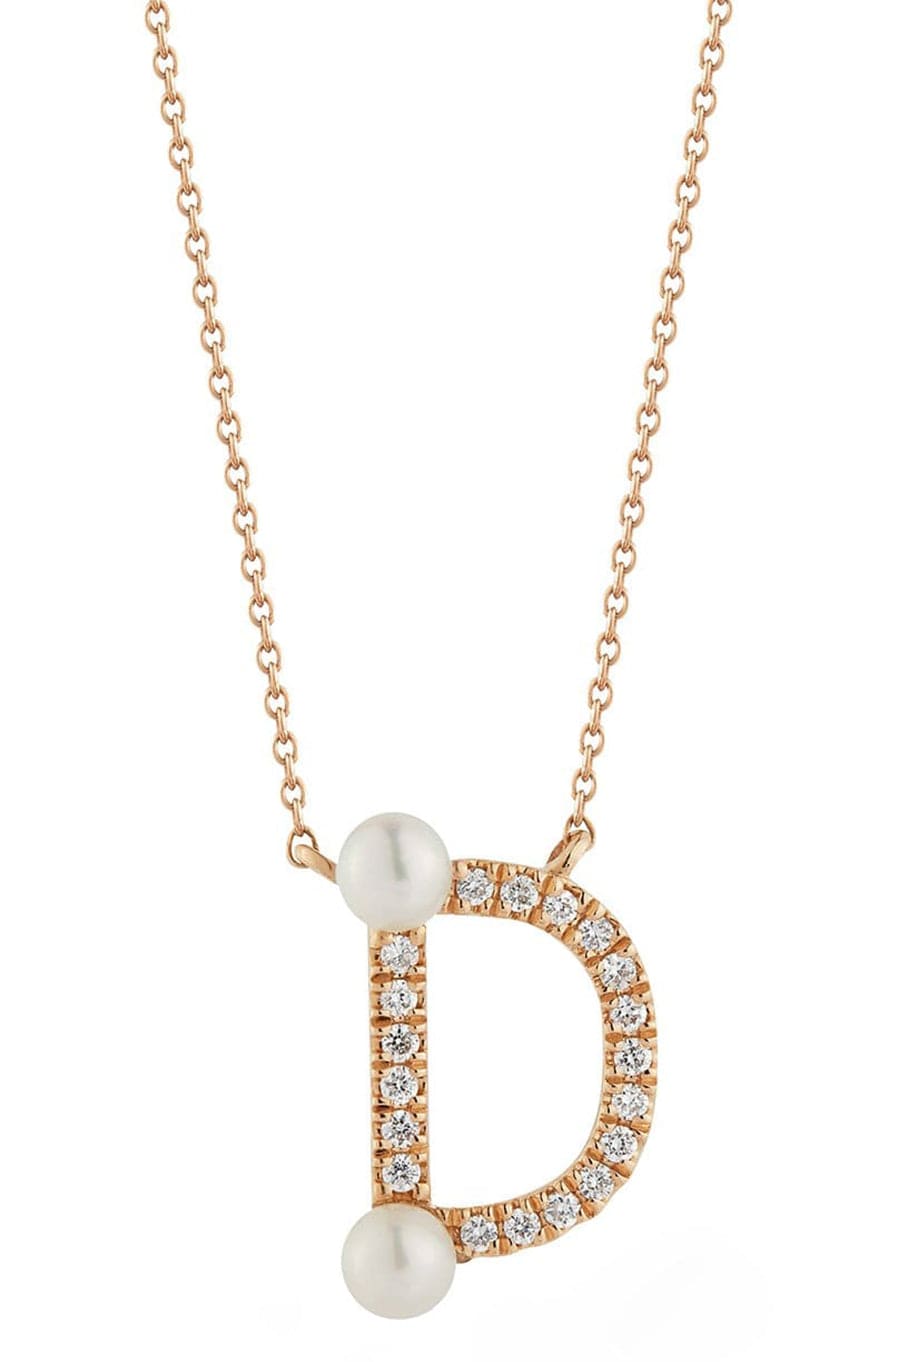 DANA REBECCA DESIGNS-Pearl Ivy Initial D Necklace-YELLOW GOLD